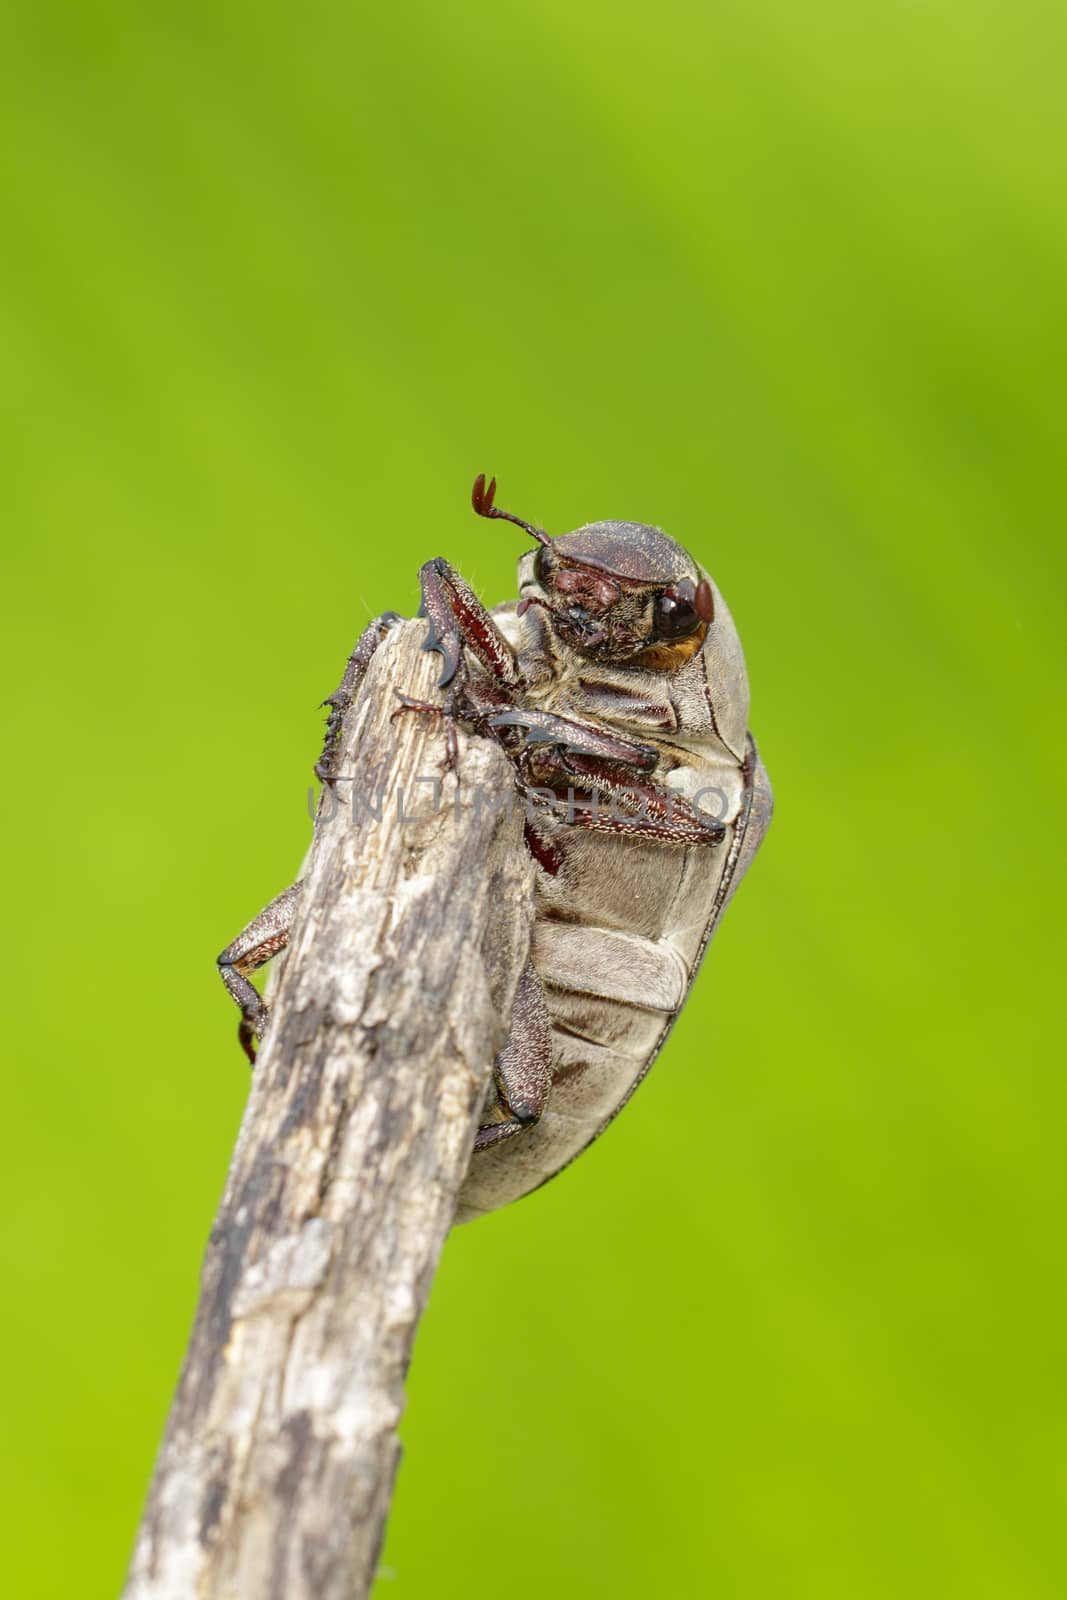 Image of cockchafer (Melolontha melolontha) on a branch on a natural background. Insect. Animals.